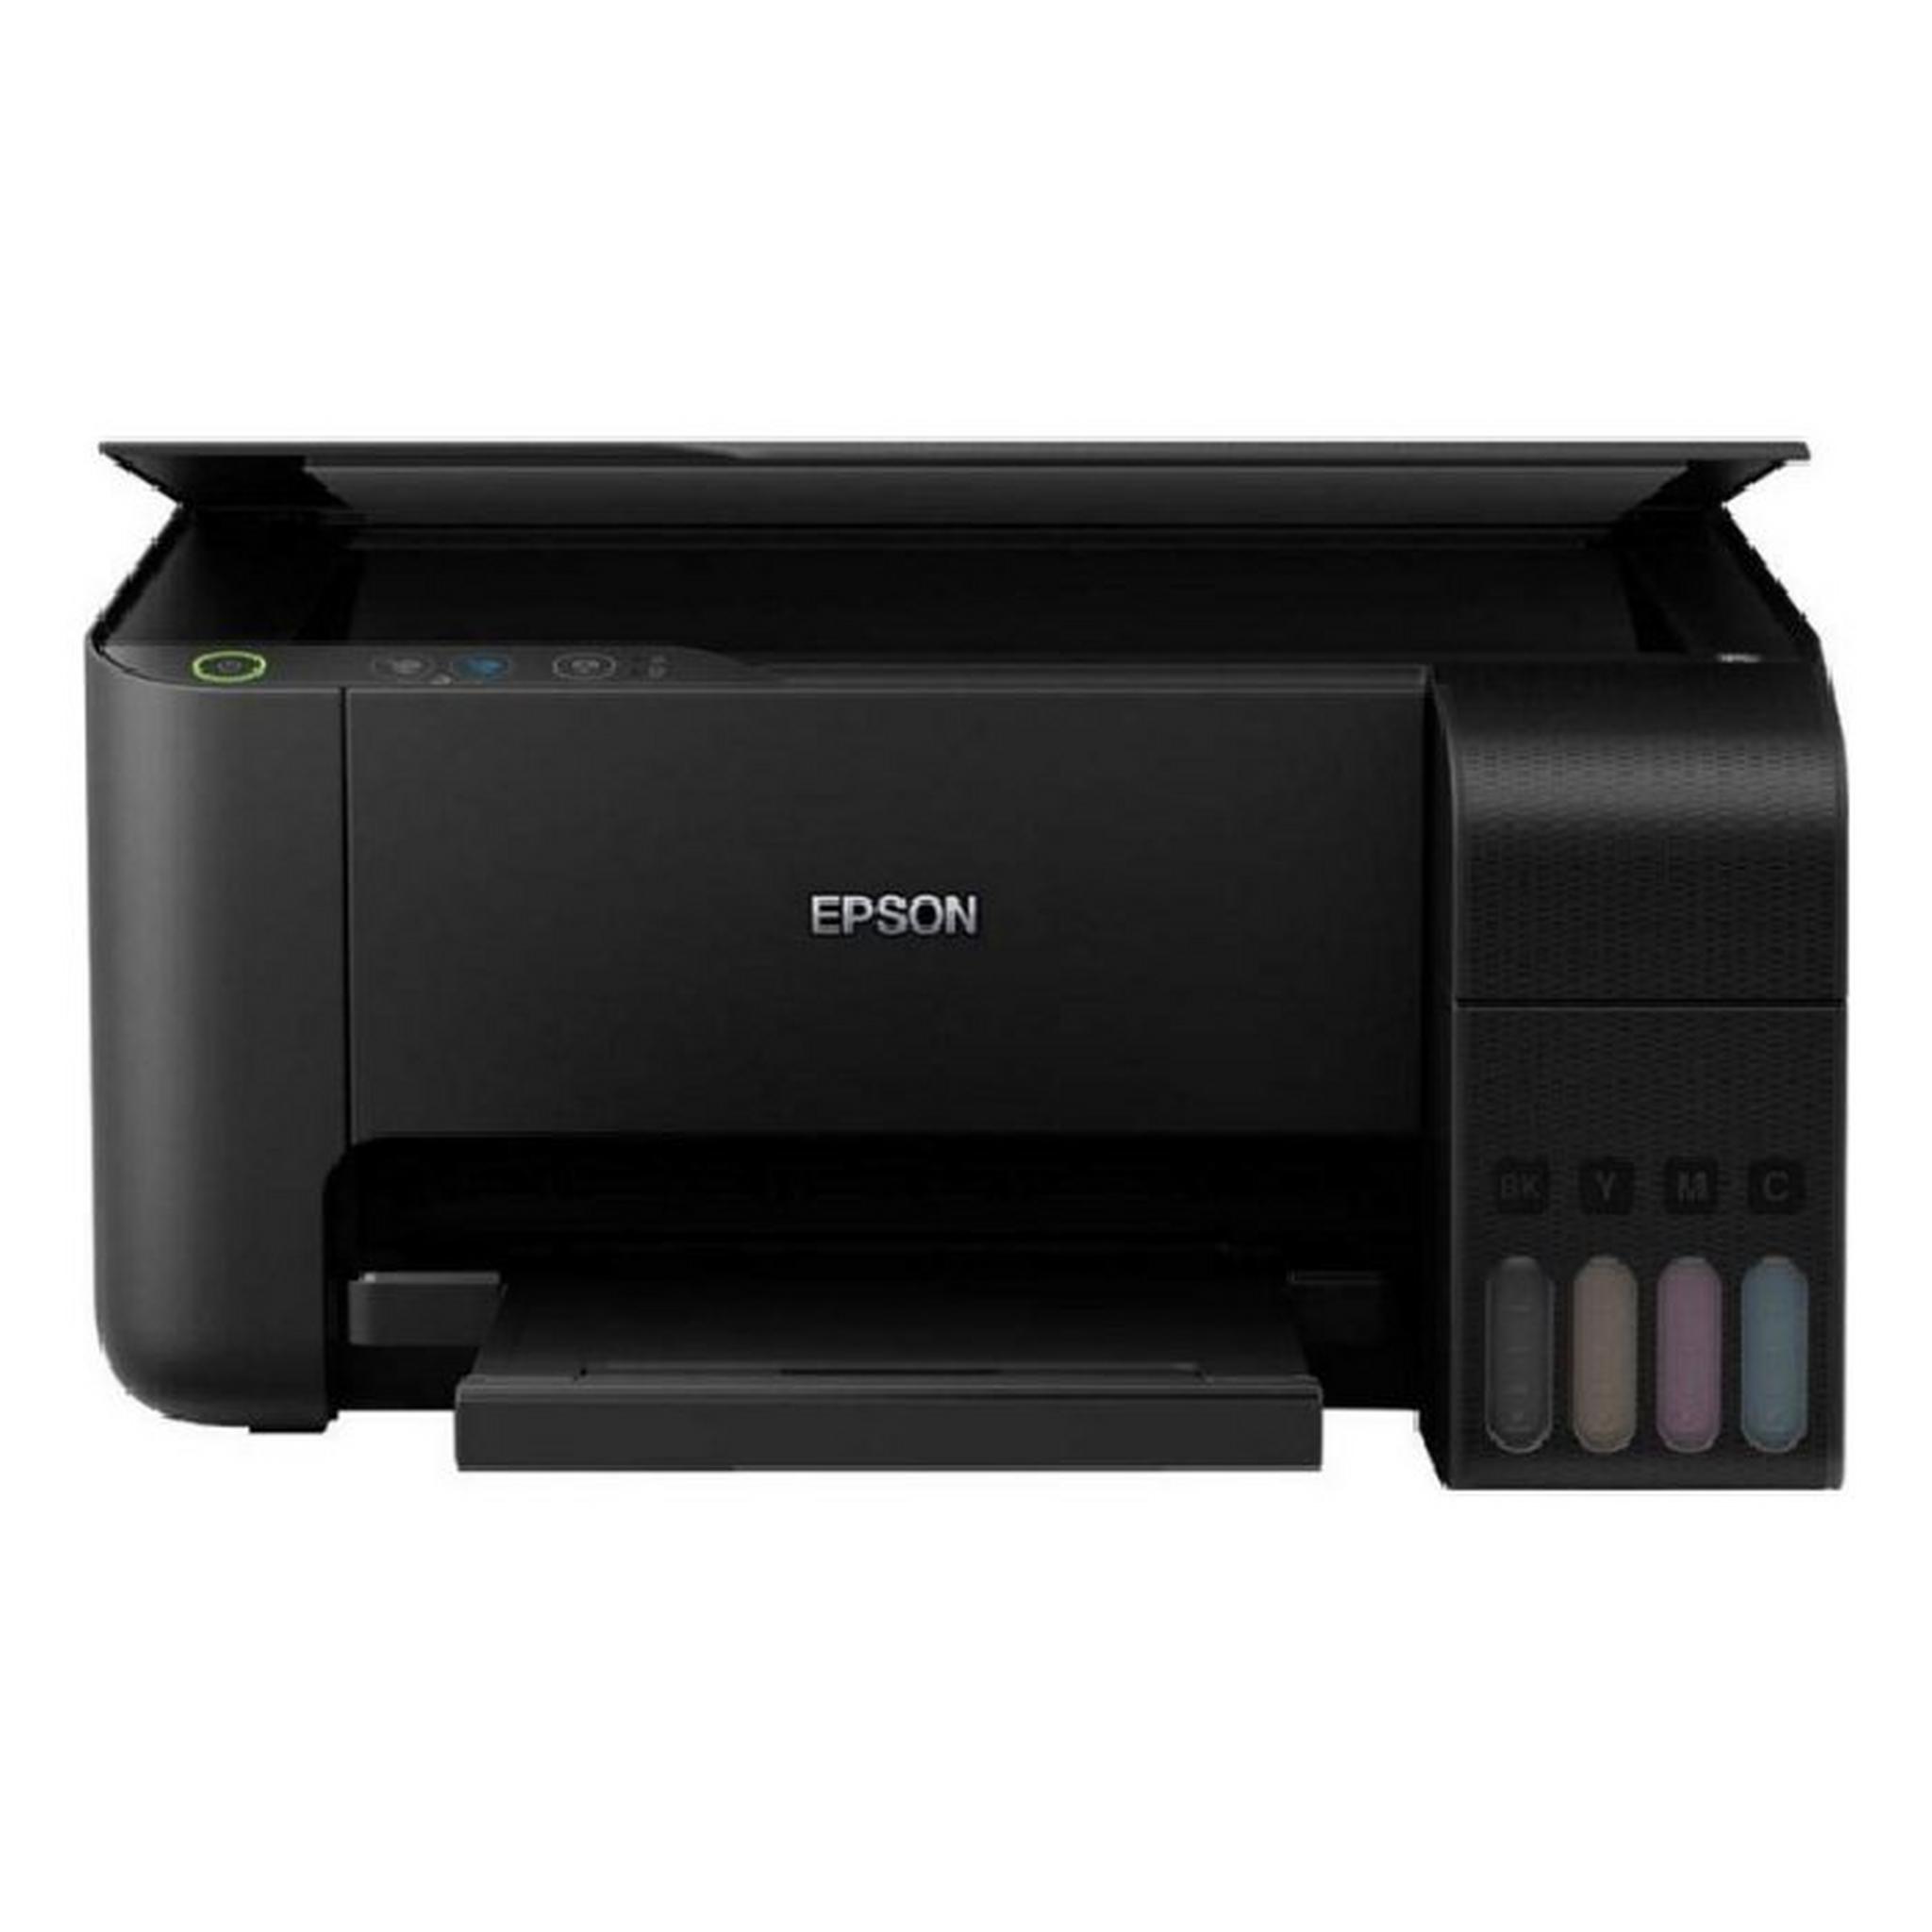 Epson EcoTank A4 Wi-Fi All-in-One Ink Tank Printer - L3250